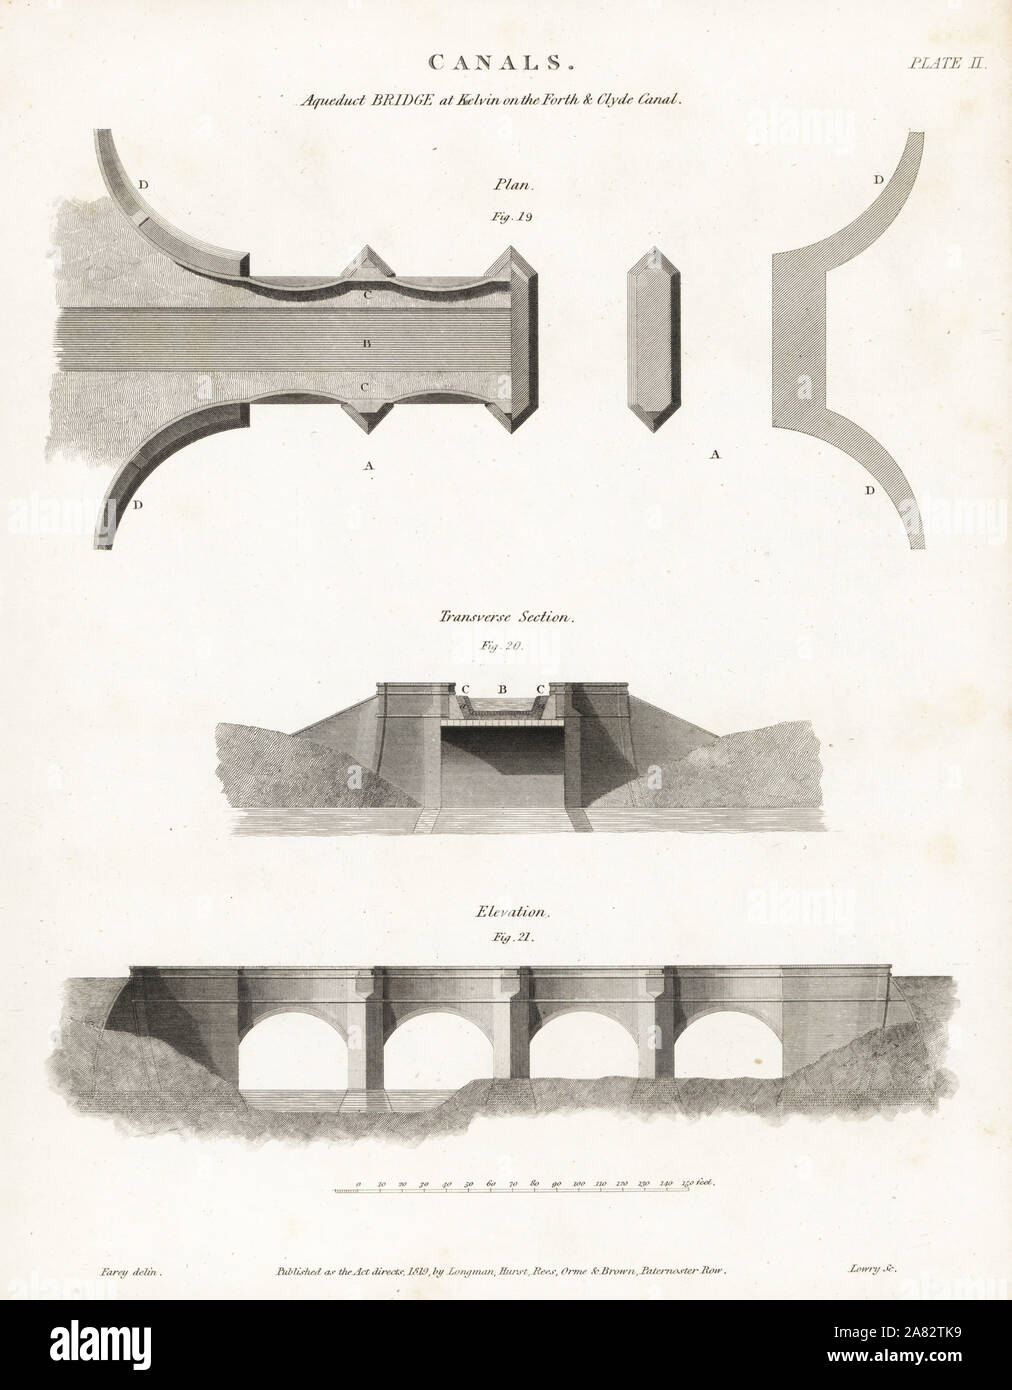 Plan, elevation and section of the Kelvin Aqueduct, built by Robert Whitworth, over the Forth River, Scotland, 1790. Copperplate engraving by Wilson Lowry after a drawing by John Farey from Abraham Rees' Cyclopedia or Universal Dictionary of Arts, Sciences and Literature, Longman, Hurst, Rees, Orme and Brown, London, 1819. Stock Photo